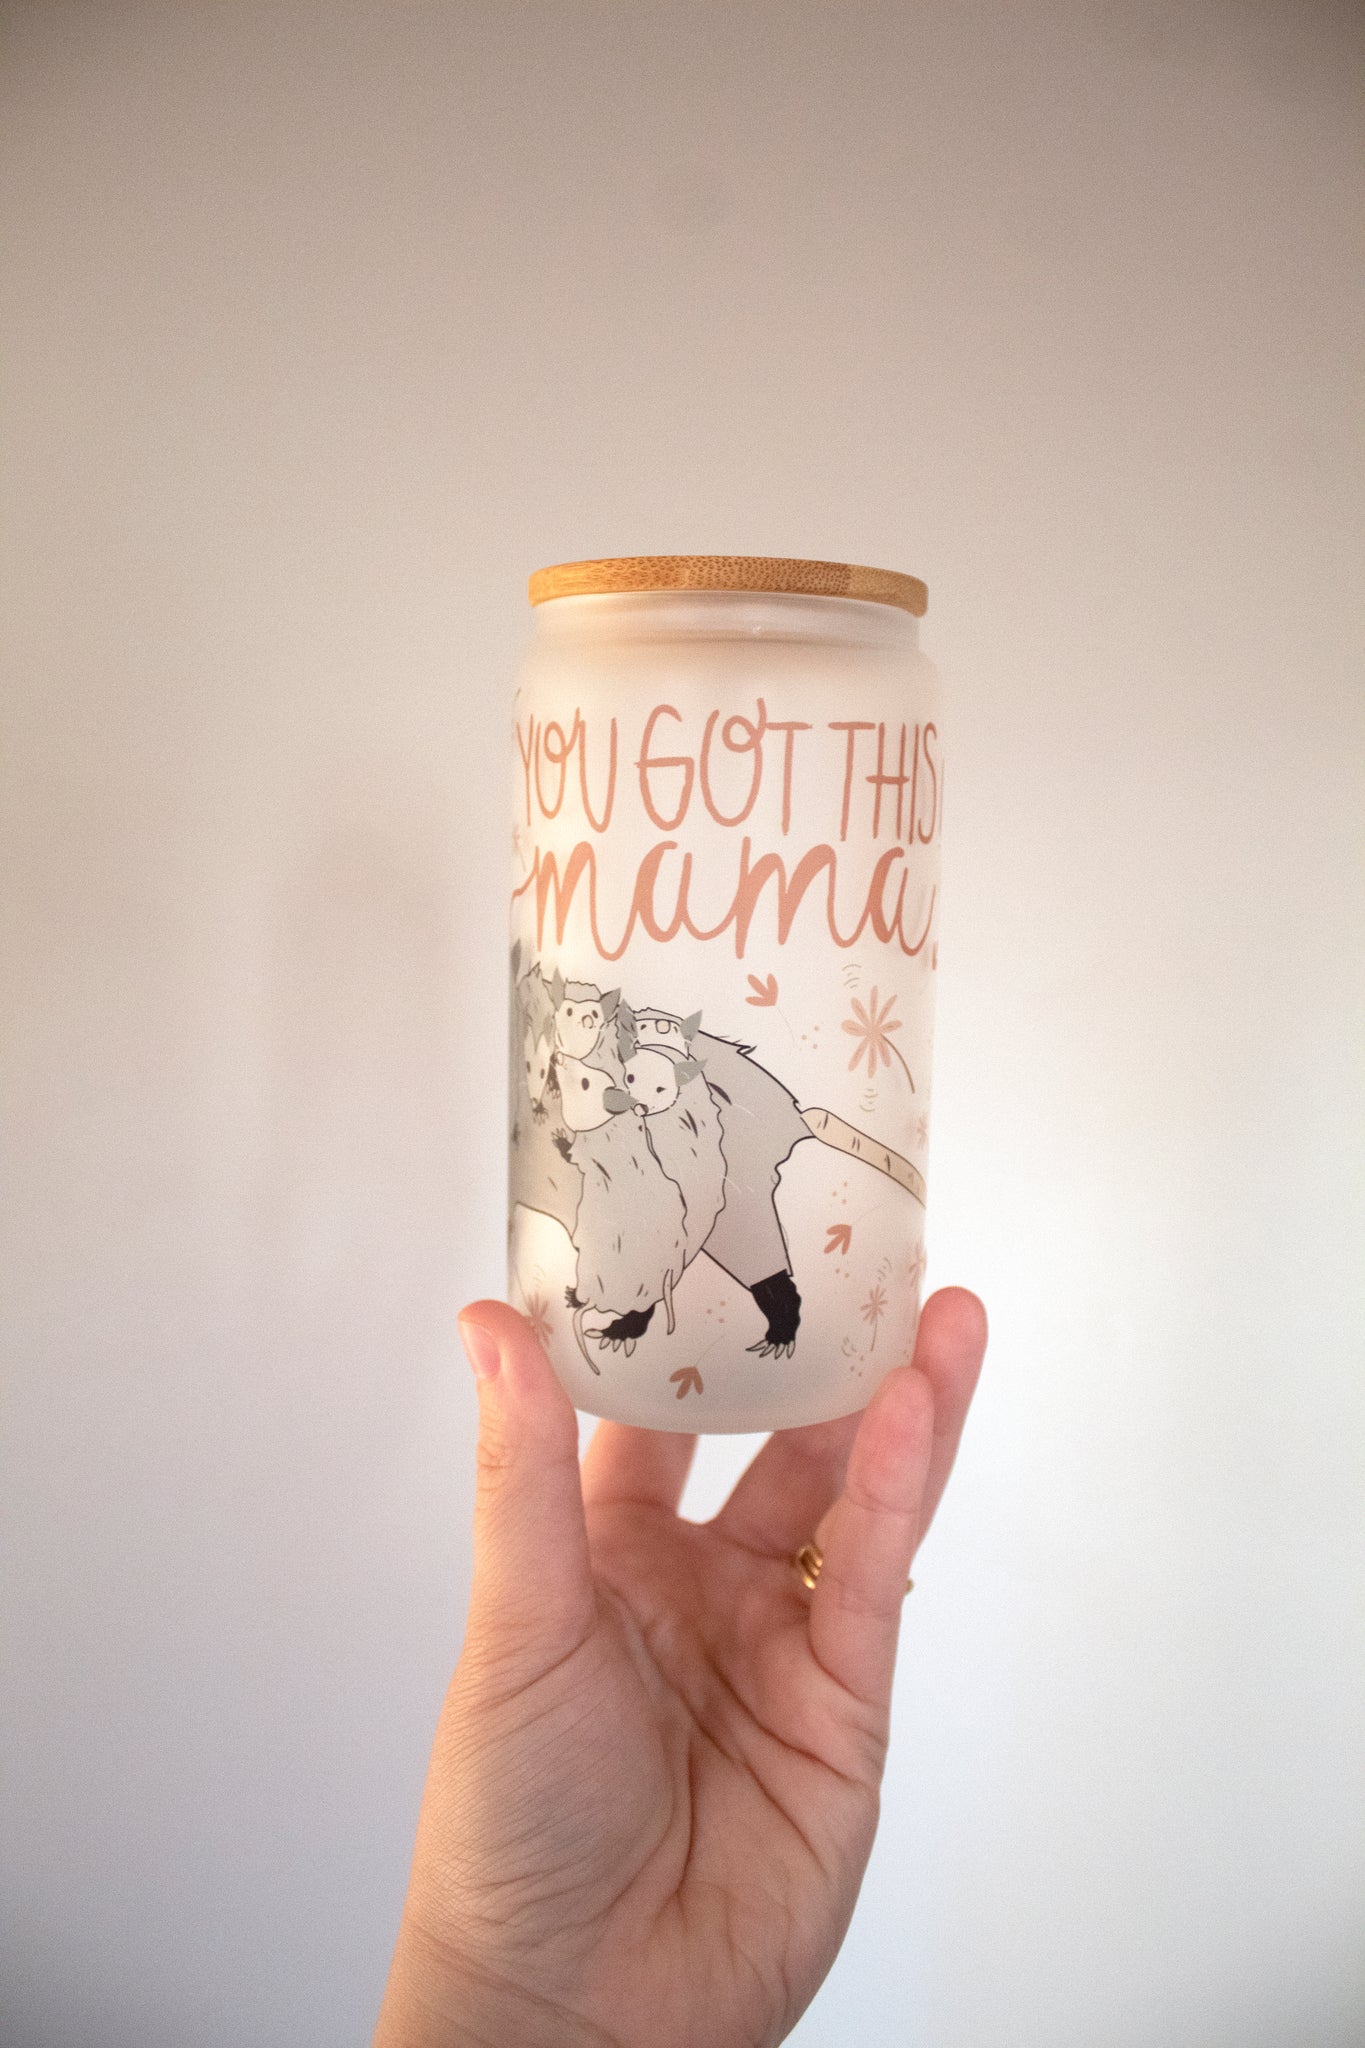 "You Got This Mama" Frosted Glass Cup